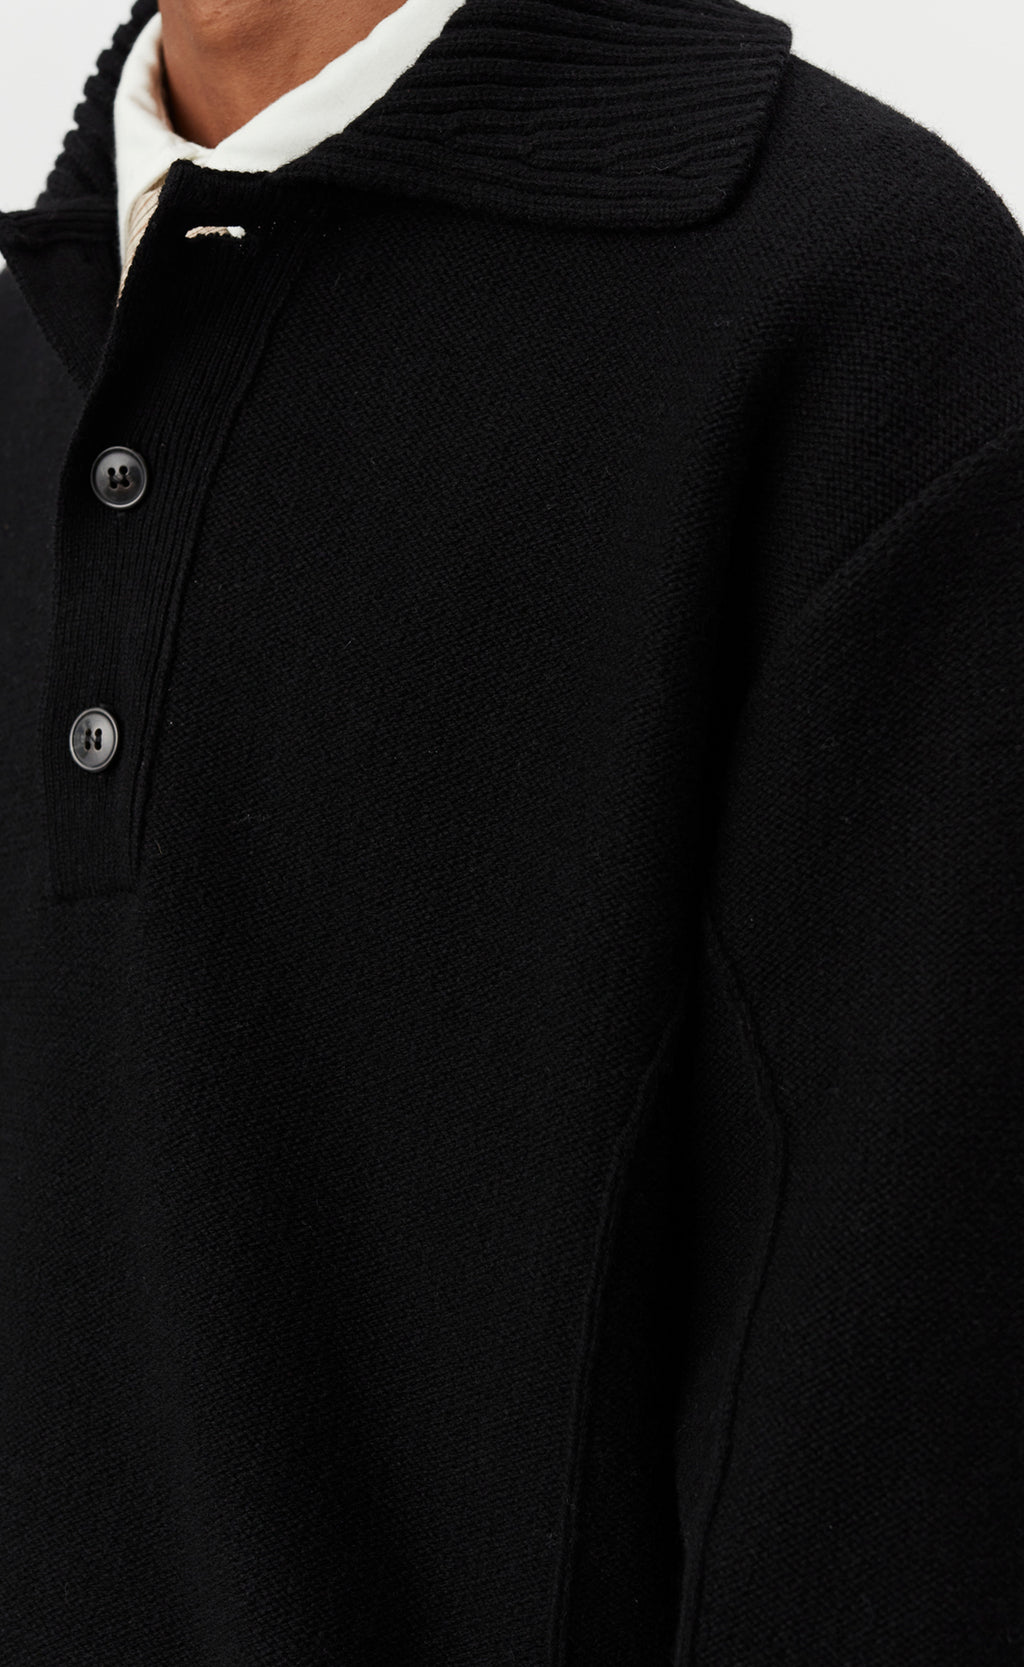 Company Polo - Black Recycled Wool